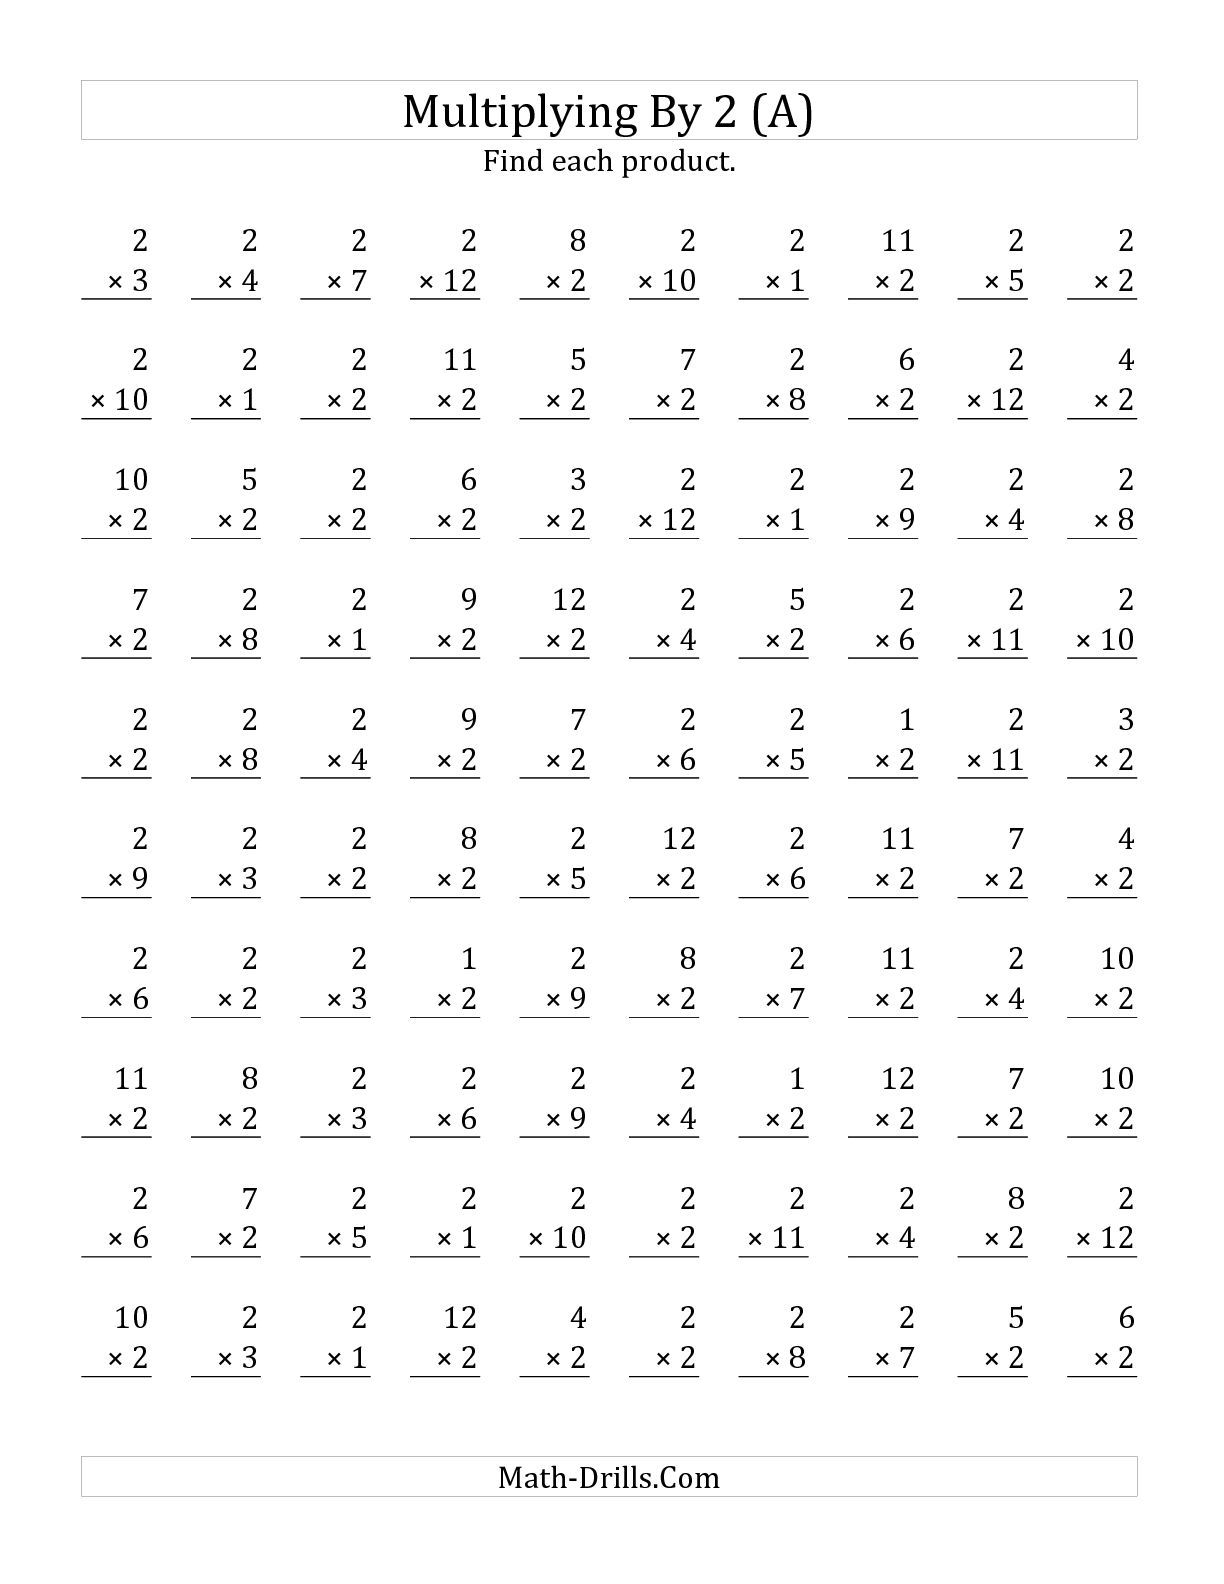 The Multiplying 1 to 12 by 2 (A) math worksheet from the Multiplicatio